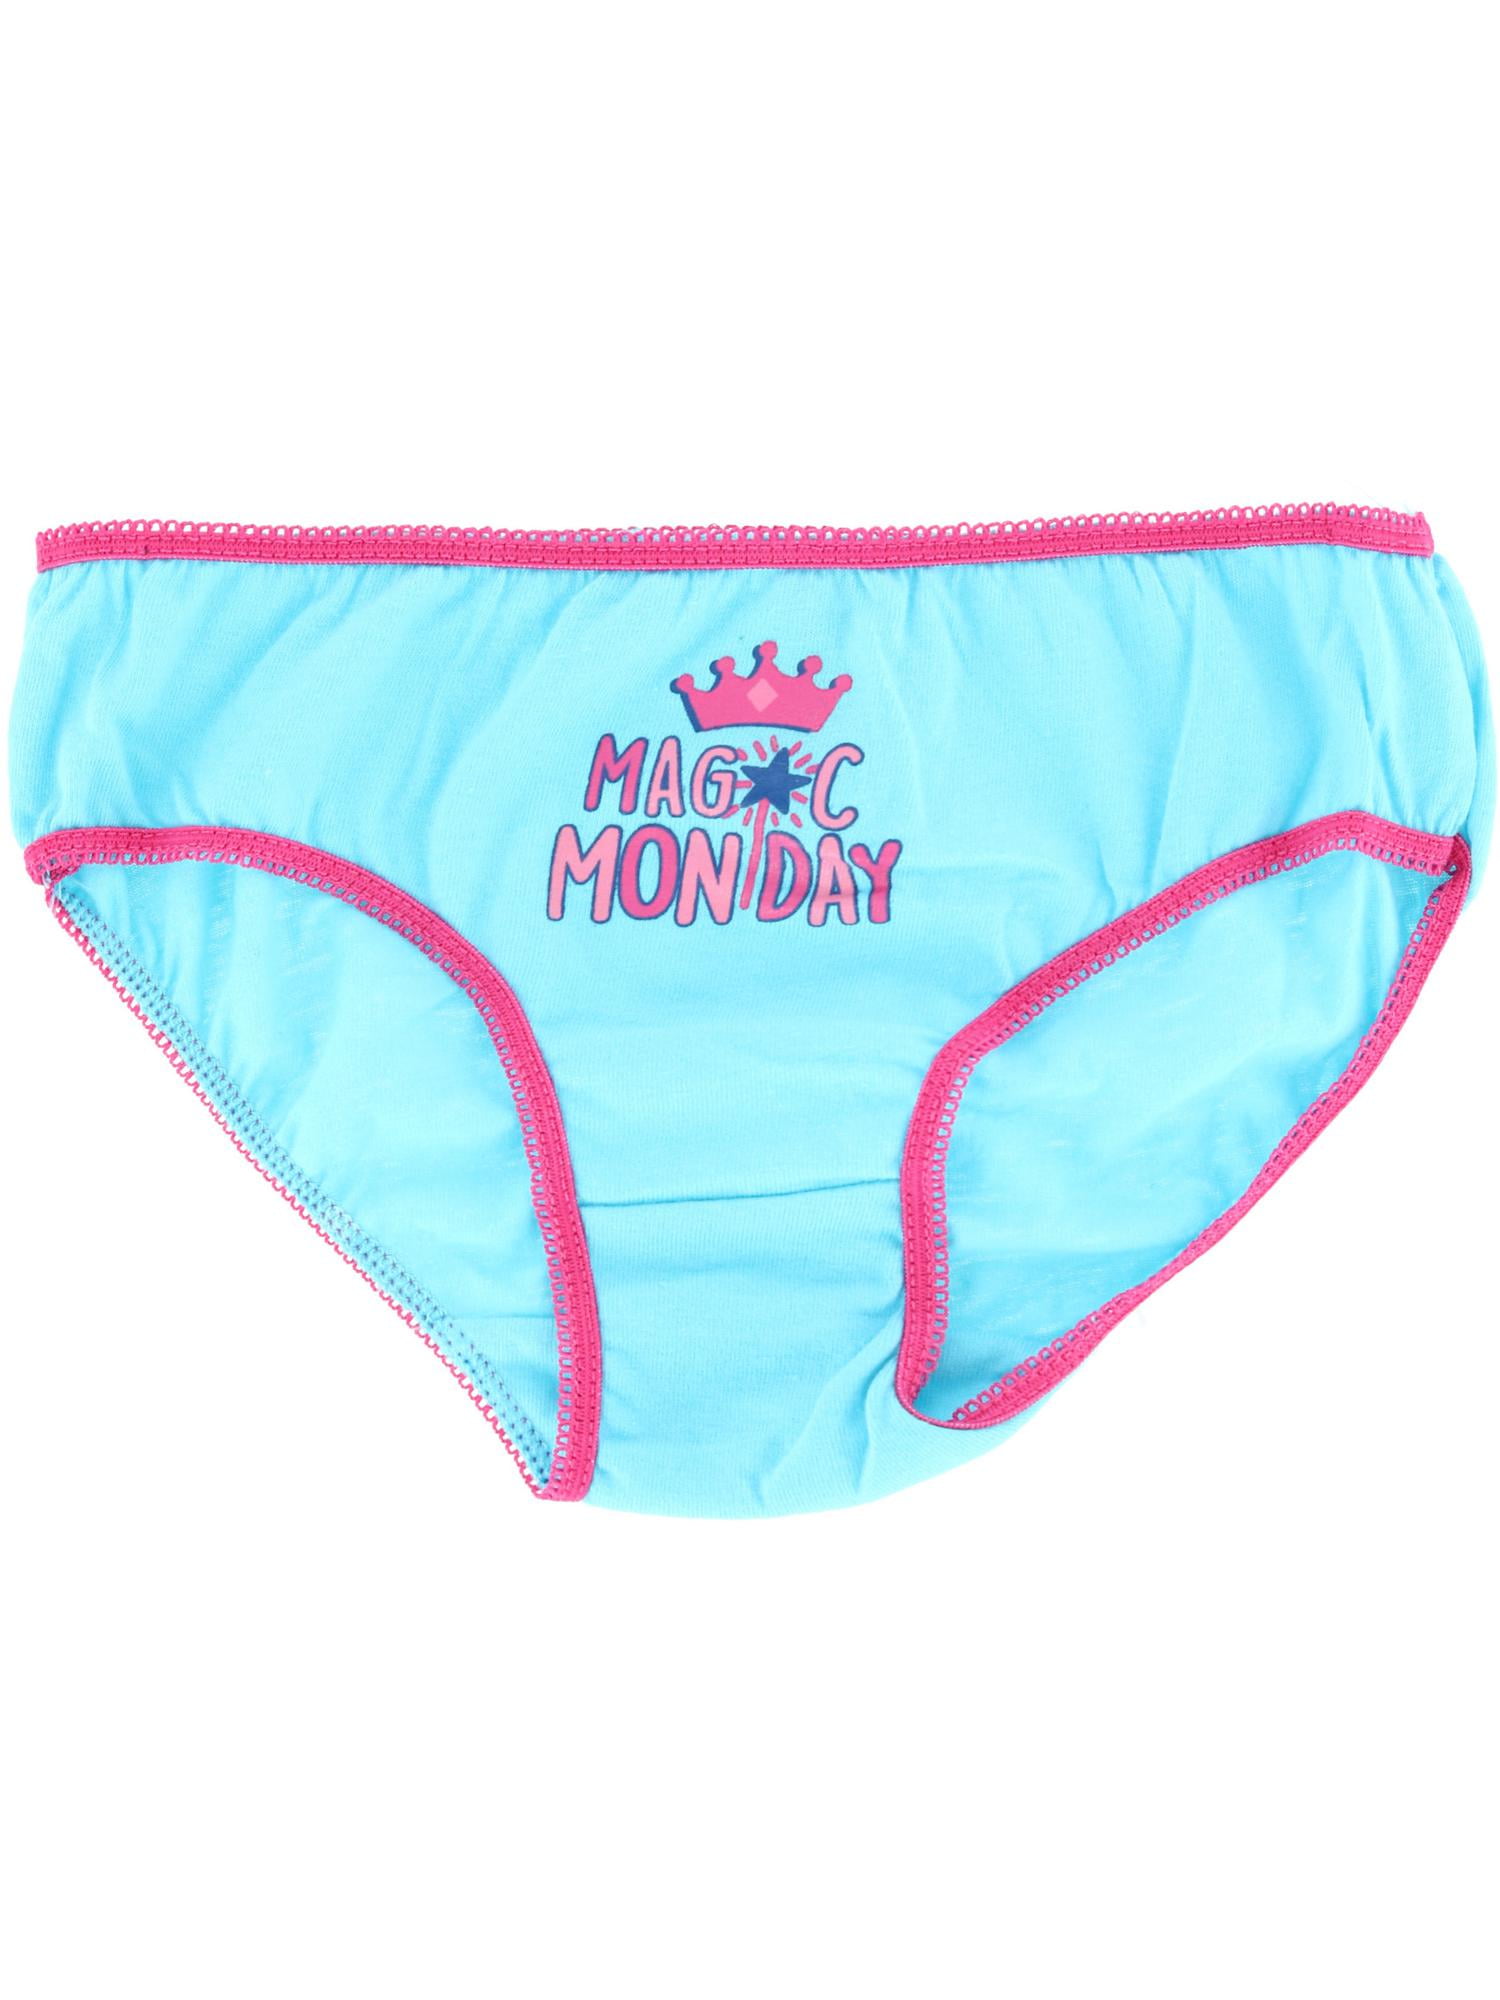 Size 6 Day of the week underwear for girls, panties, girls, jours de la  semaine, 7 pairs of girls underwear, ready to ship